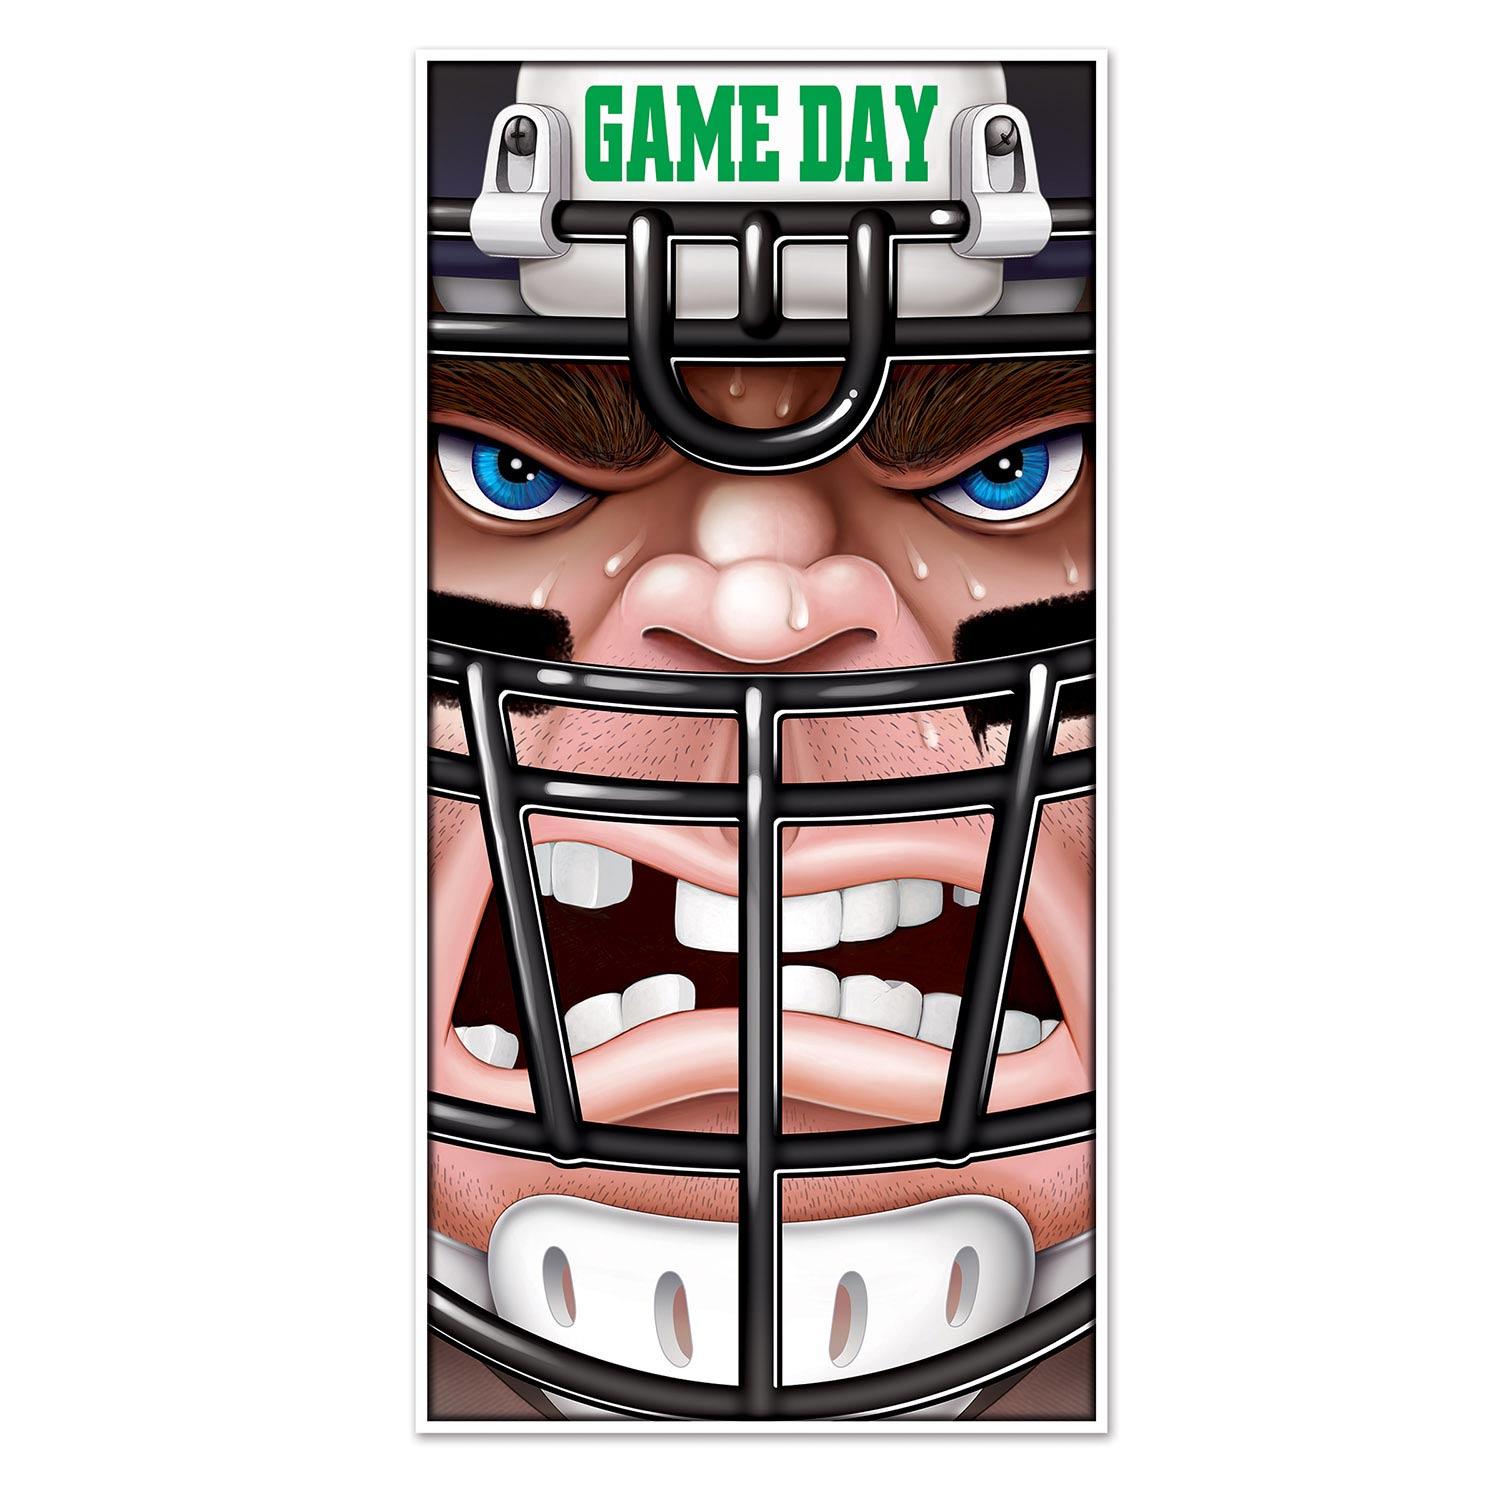 American Football Door Cover Decoration by Beistle 54696 available from a large collection of NFL party goods here at Karnival Costumes online party shop